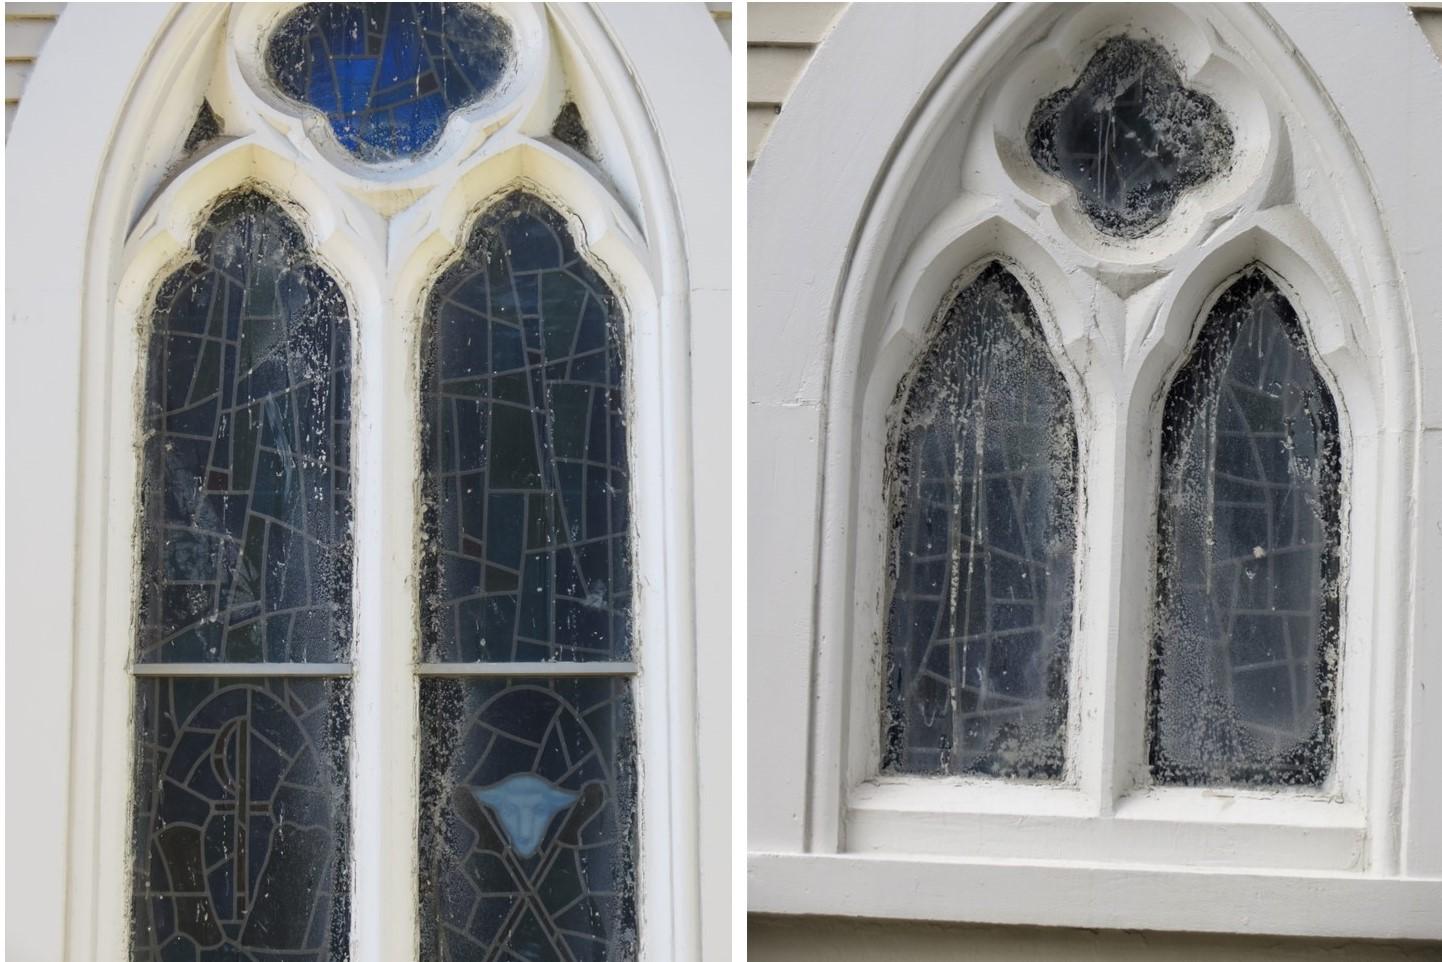 stained glass repair, stained glass protectie glass, stained glass protective coverings, Cumberland RI